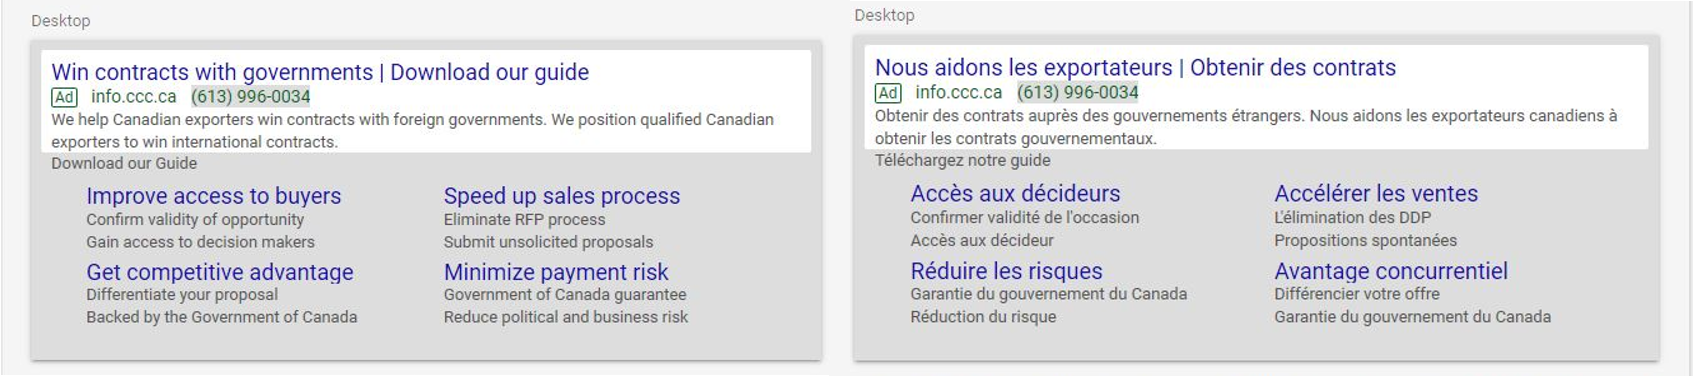 ebook search ads english and french